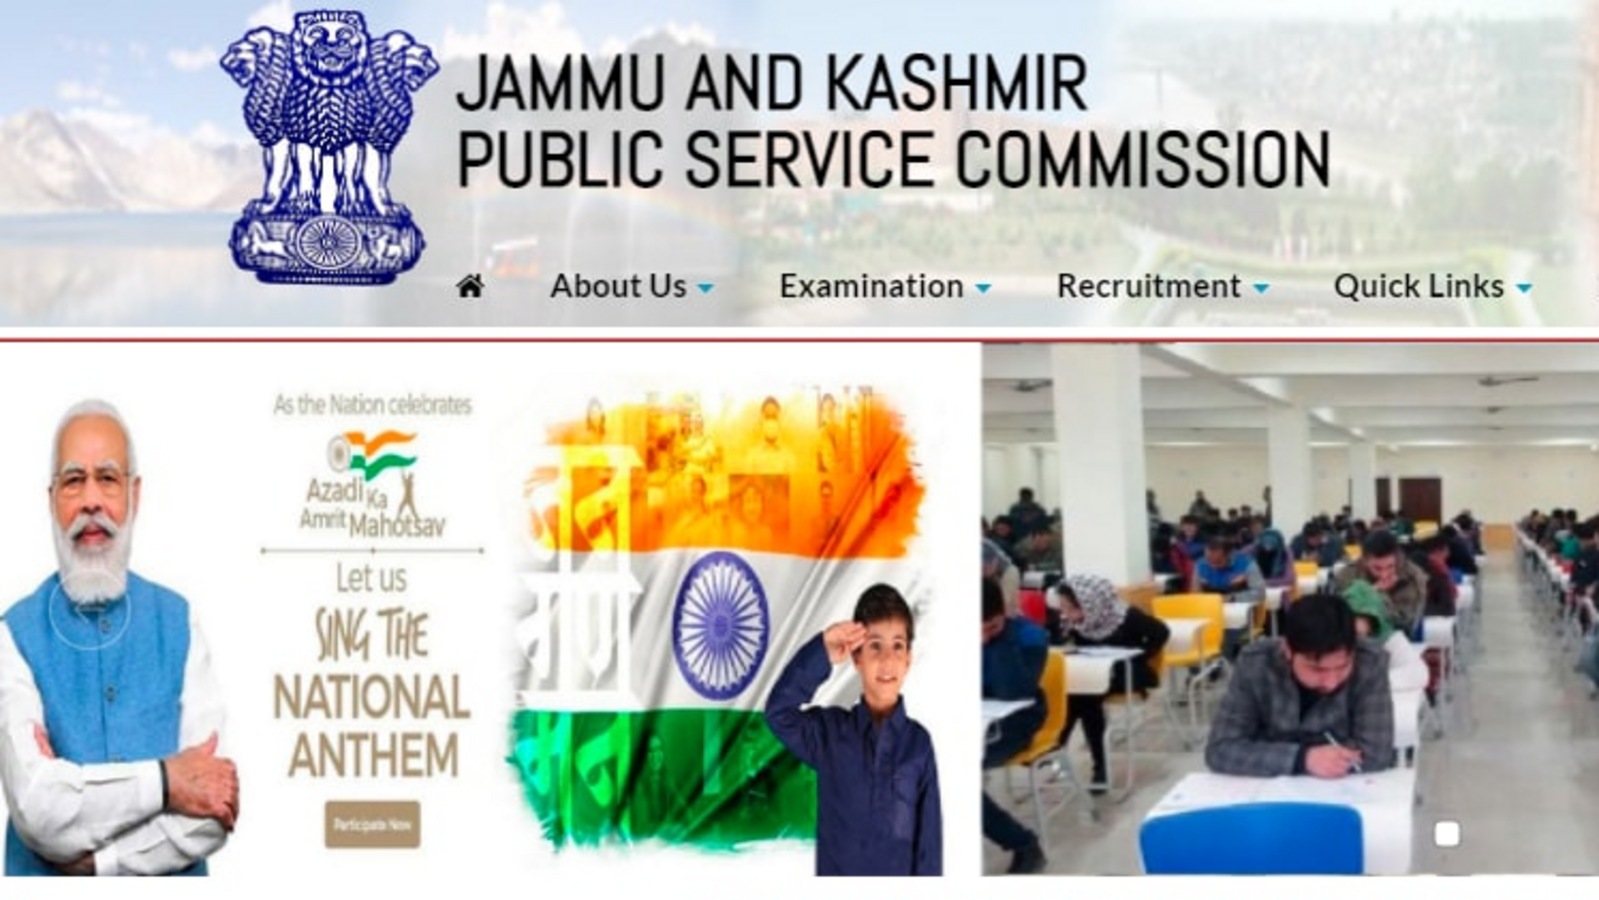 JKPSC recruitment: Apply for 126 vacancies of Assistant Professor from May 30